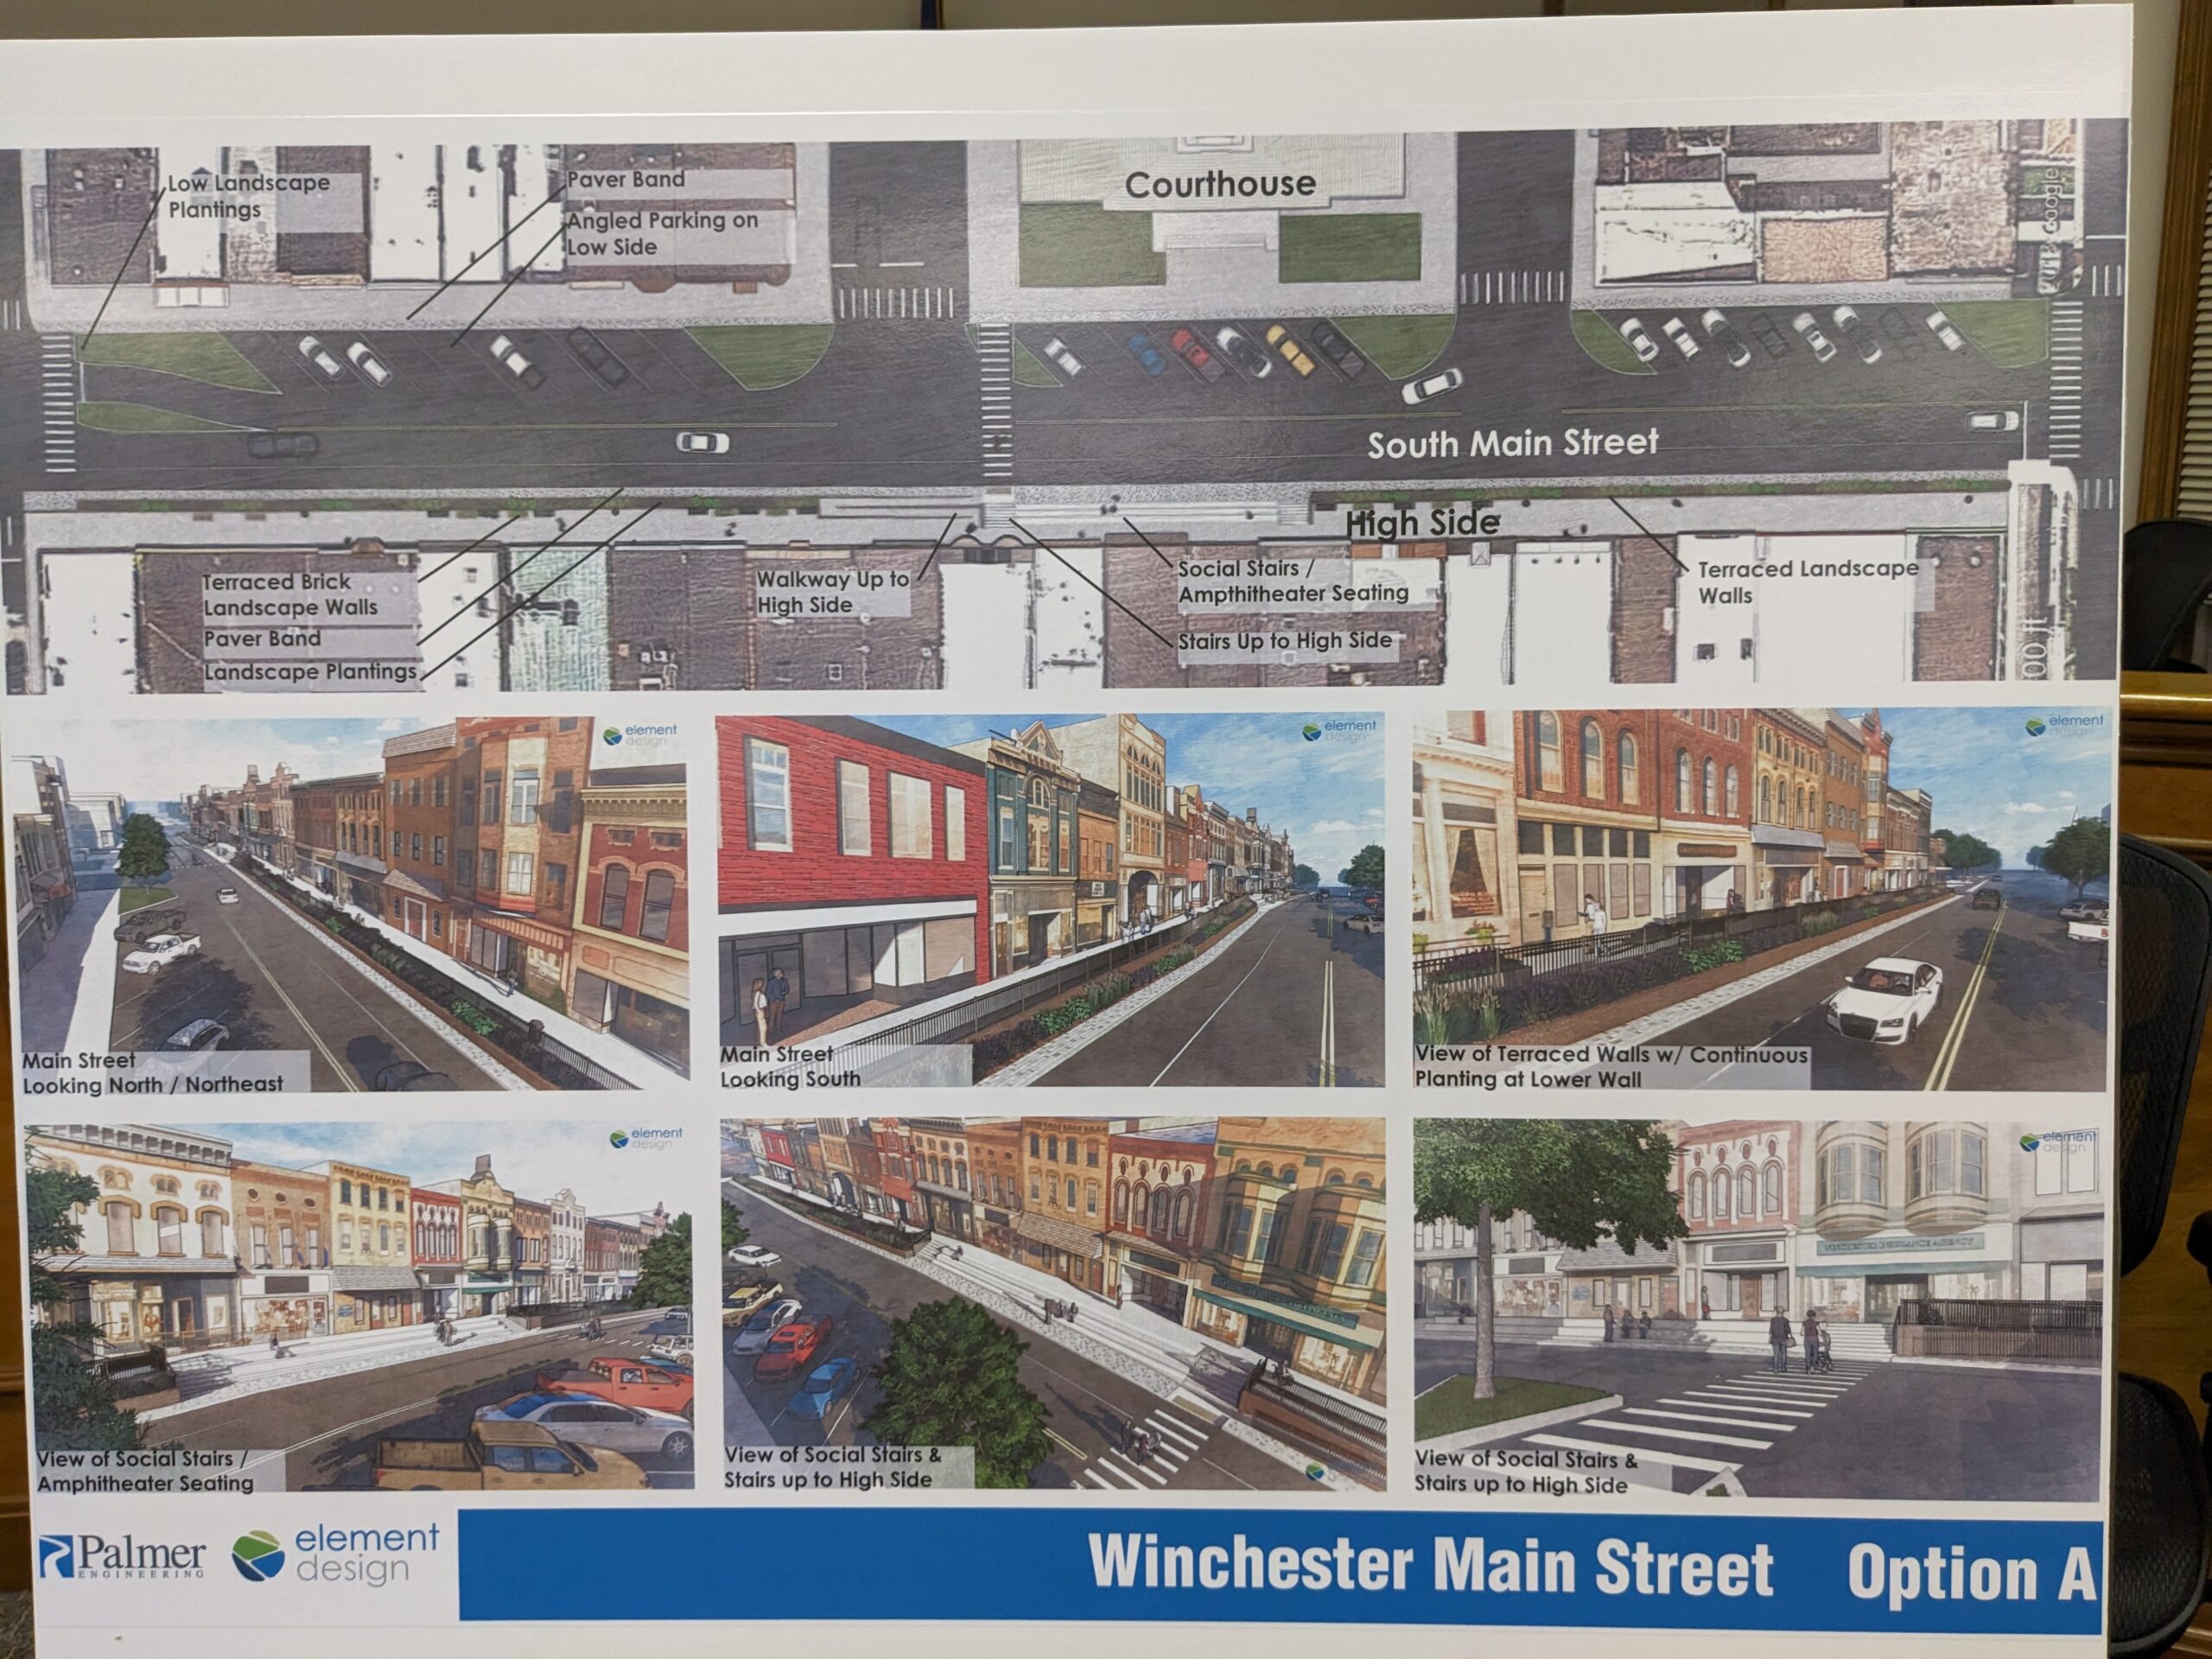 Winchester Main Street 'High Side' proposal, option A